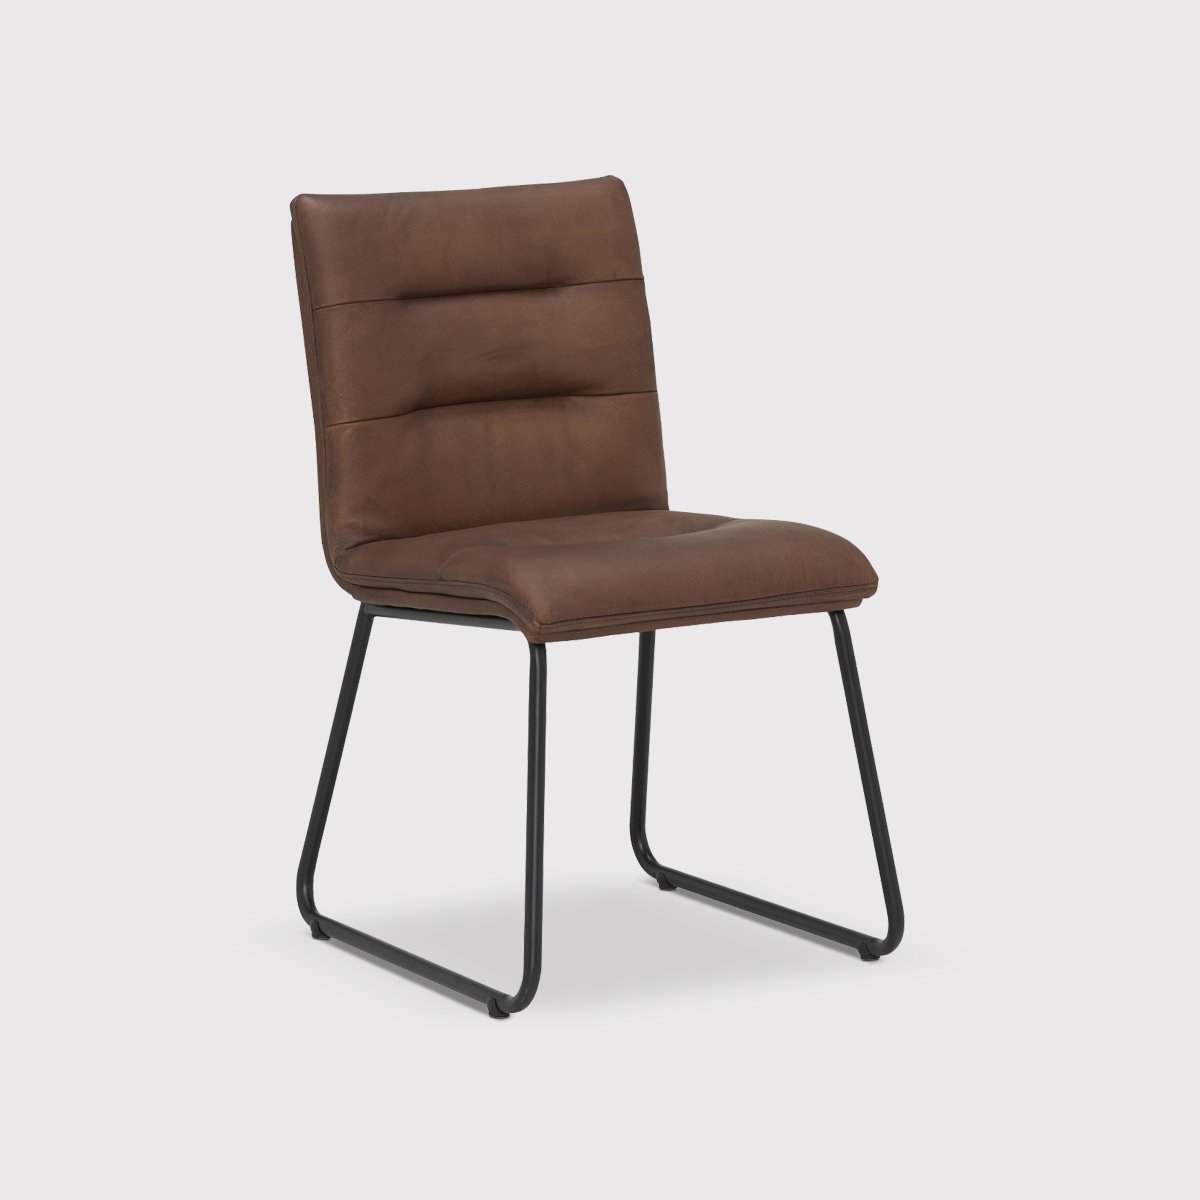 Pure Furniture Zena Dining Chair, Brown Leather | Barker & Stonehouse